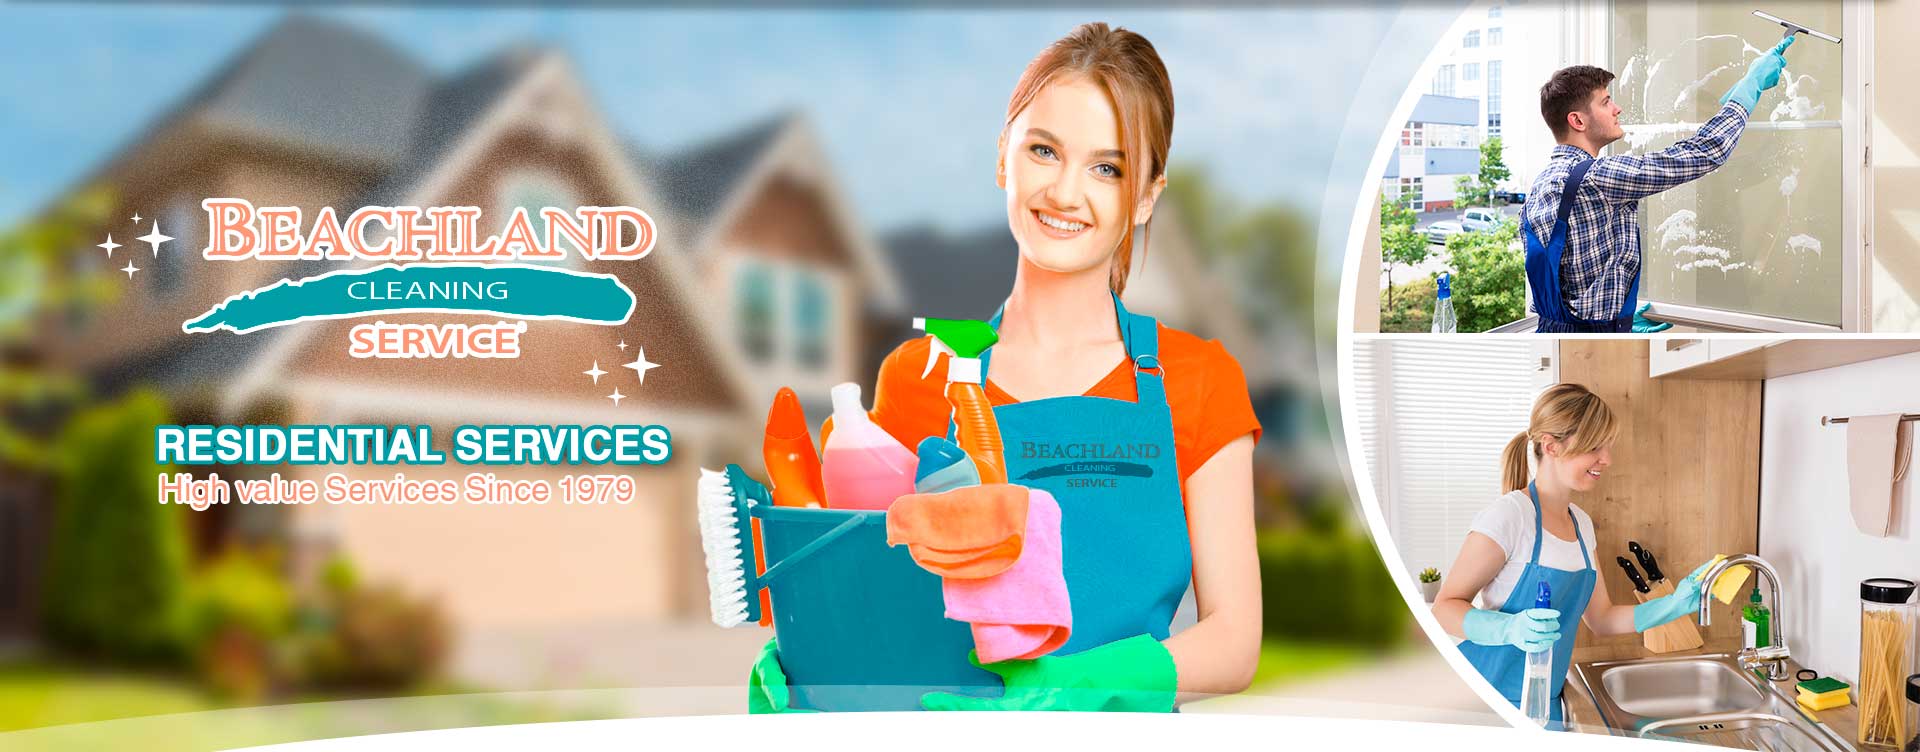 Commercial Cleaning Services in Palm Beach County